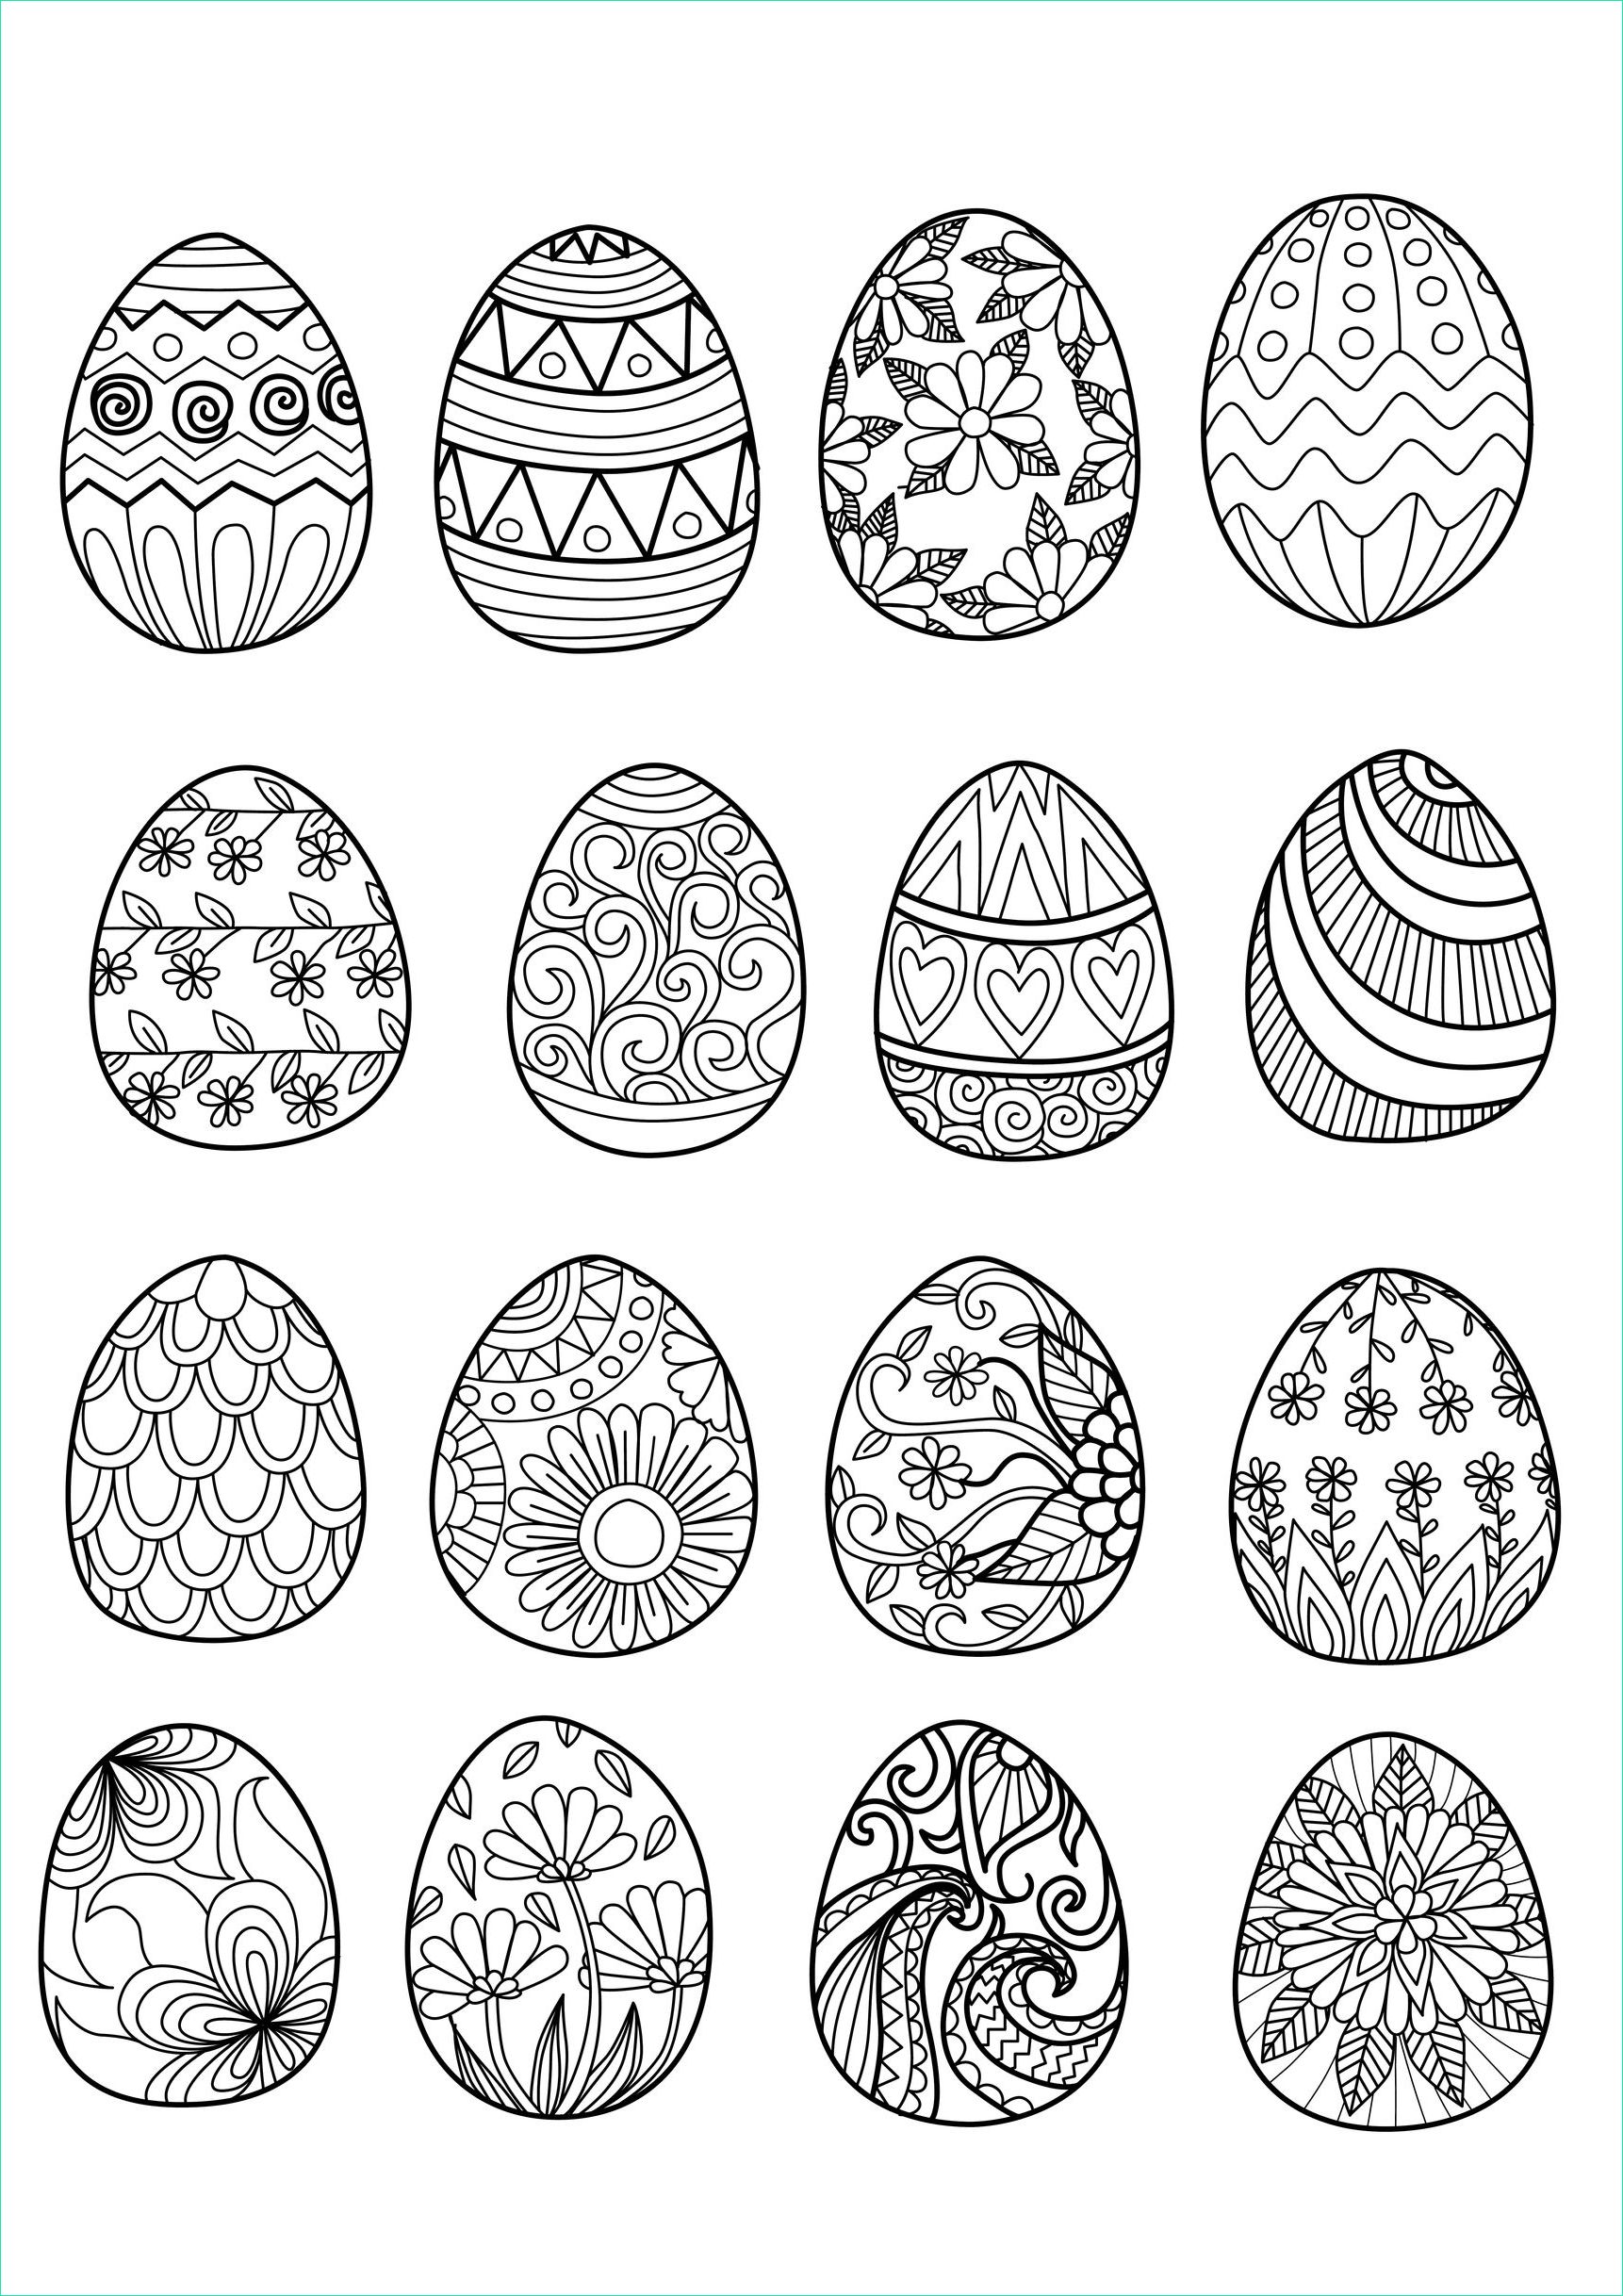 image=paques coloriage paques 16 oeufs 1